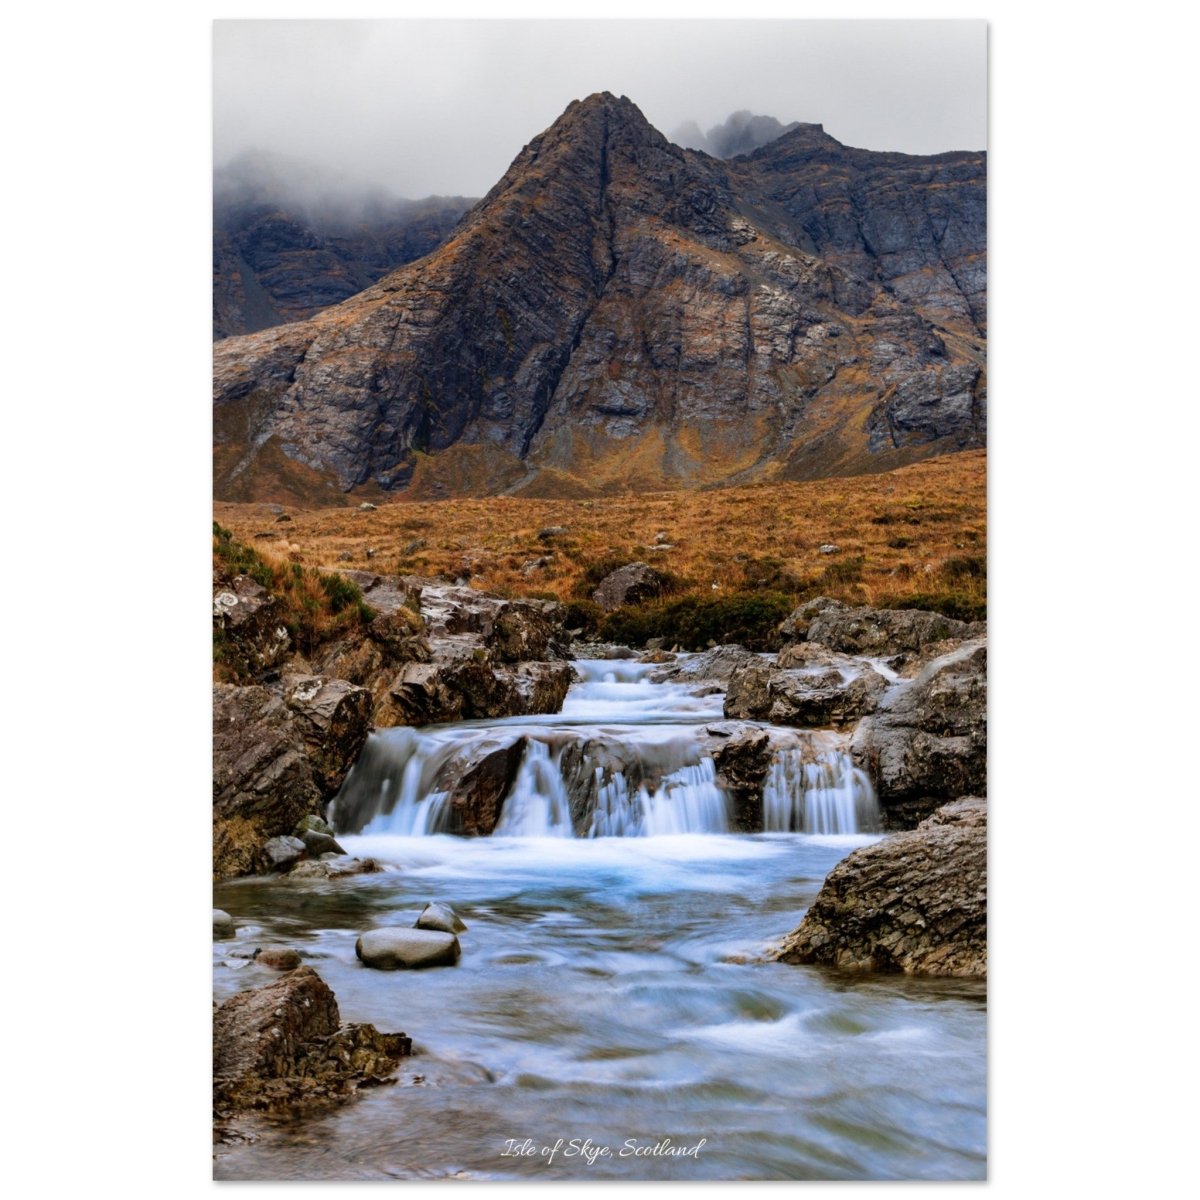 20x30 cm / 8x12″ Fairy Pools, Isle of Skye by Picture This